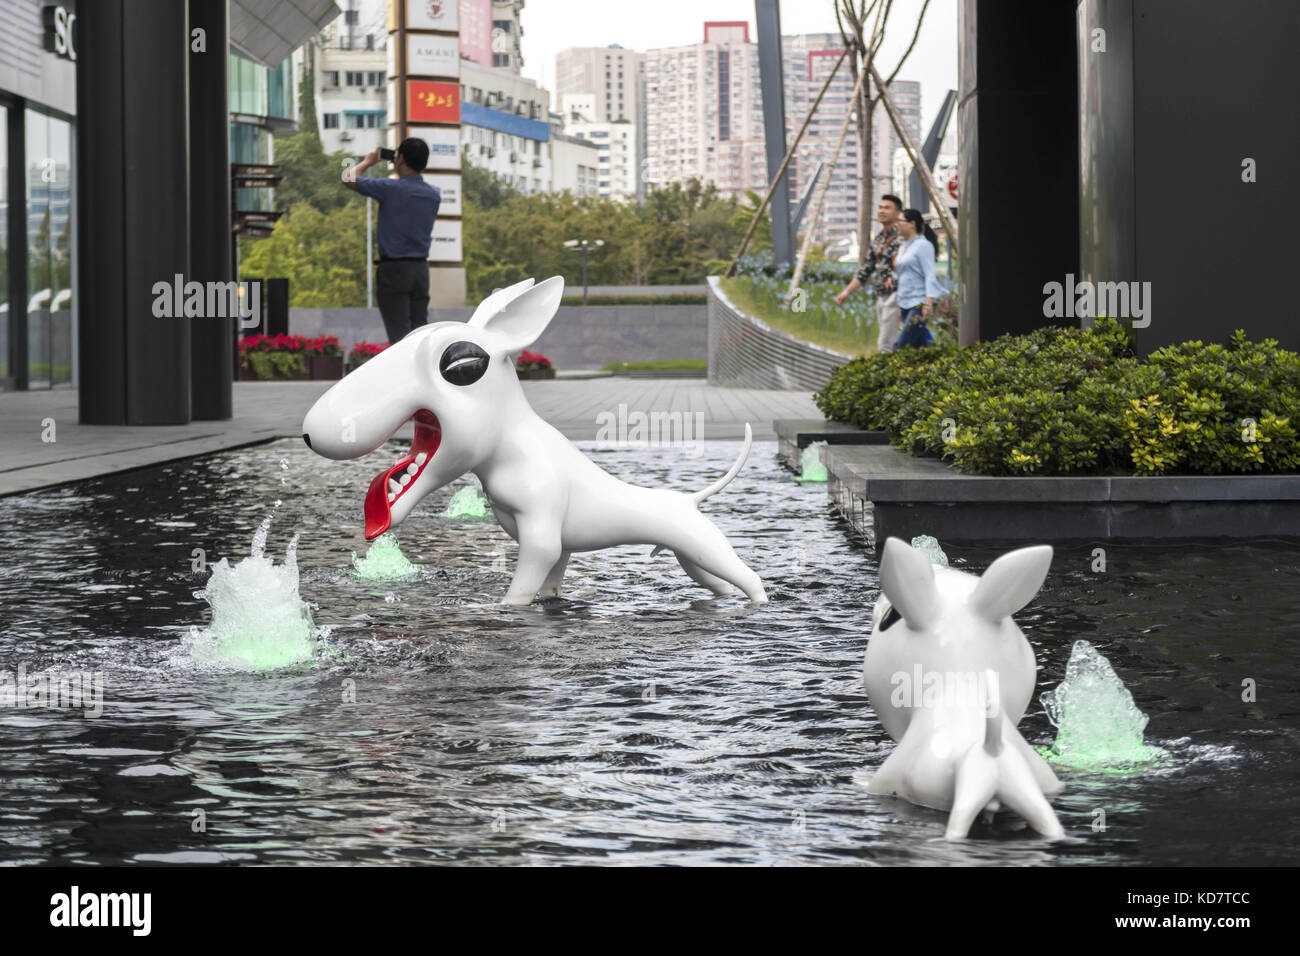 October 10, 2017 - Shanghai, Shanghai, China - Shanghai,CHINA-10th October 2017: (EDITORIAL USE ONLY. CHINA OUT)..Dog sculptures can be seen at an outdoor art installation in Shanghai. The art installation is designed by Chinese artist Seung Koo Lee. (Credit Image: © SIPA Asia via ZUMA Wire) Stock Photo